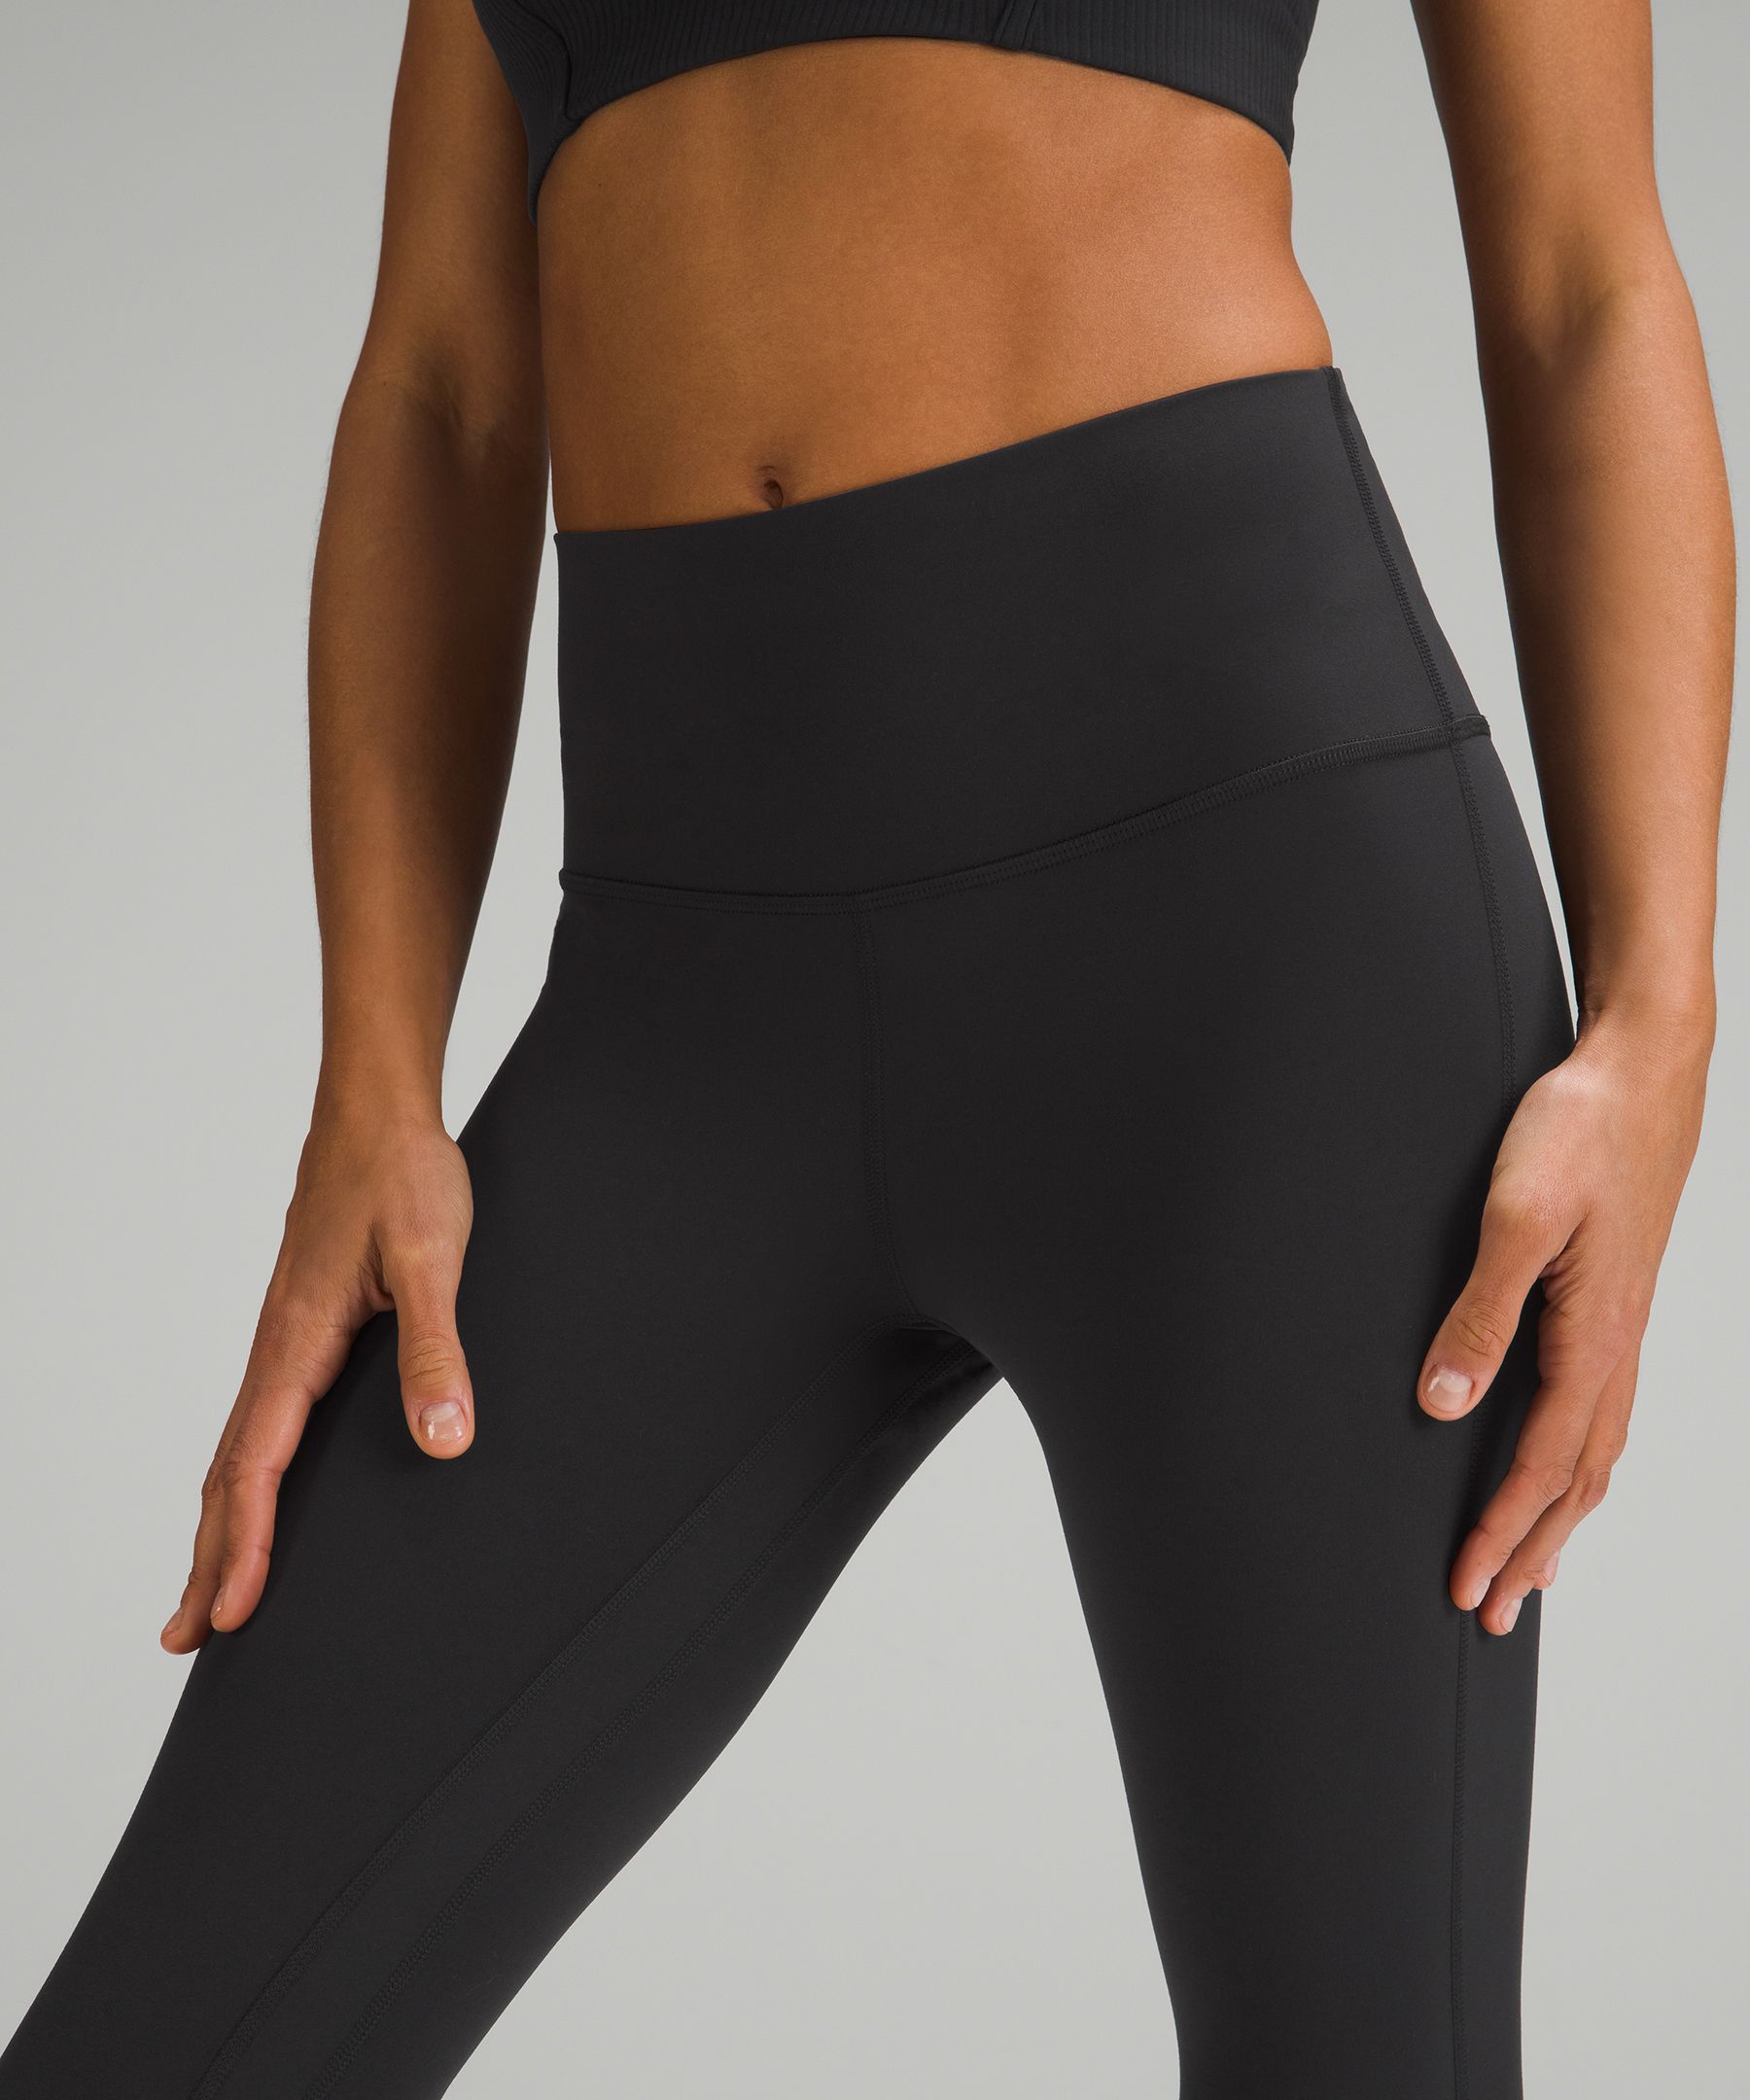 Align Mini Flares 28 - thoughts from a mid size girly with calves : r/ lululemon